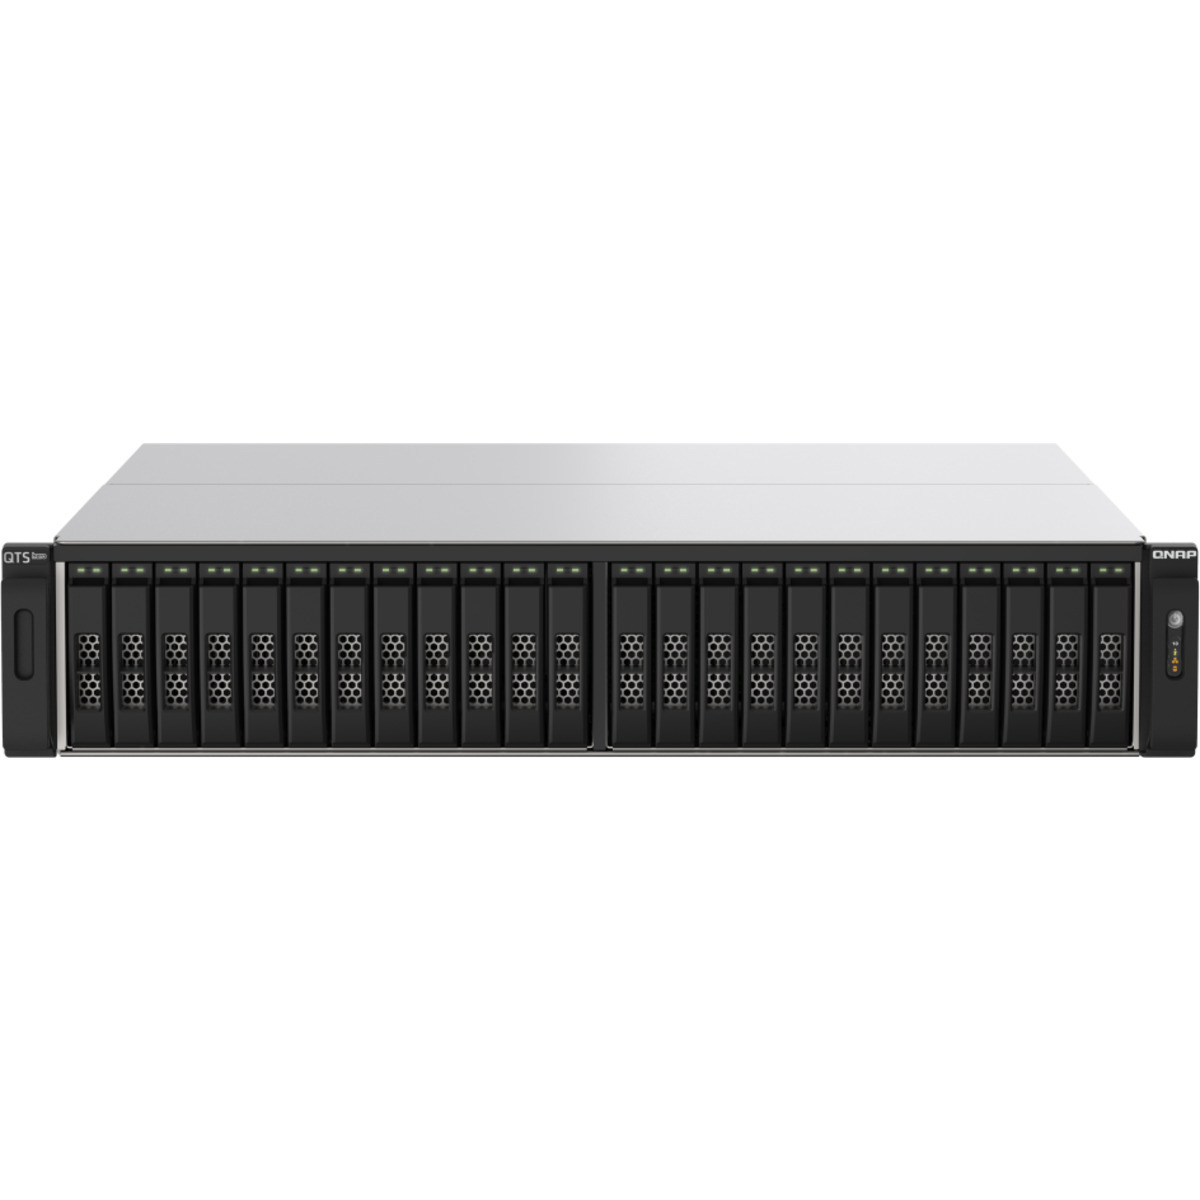 QNAP TS-h2490FU-7302P 24tb 24-Bay RackMount Large Business / Enterprise NAS - Network Attached Storage Device 24x1tb Crucial T705 CT1000T705SSD3  13600/10200MB/s M.2 2280 NVMe SSD ENTERPRISE Class Drives Installed - Burn-In Tested TS-h2490FU-7302P